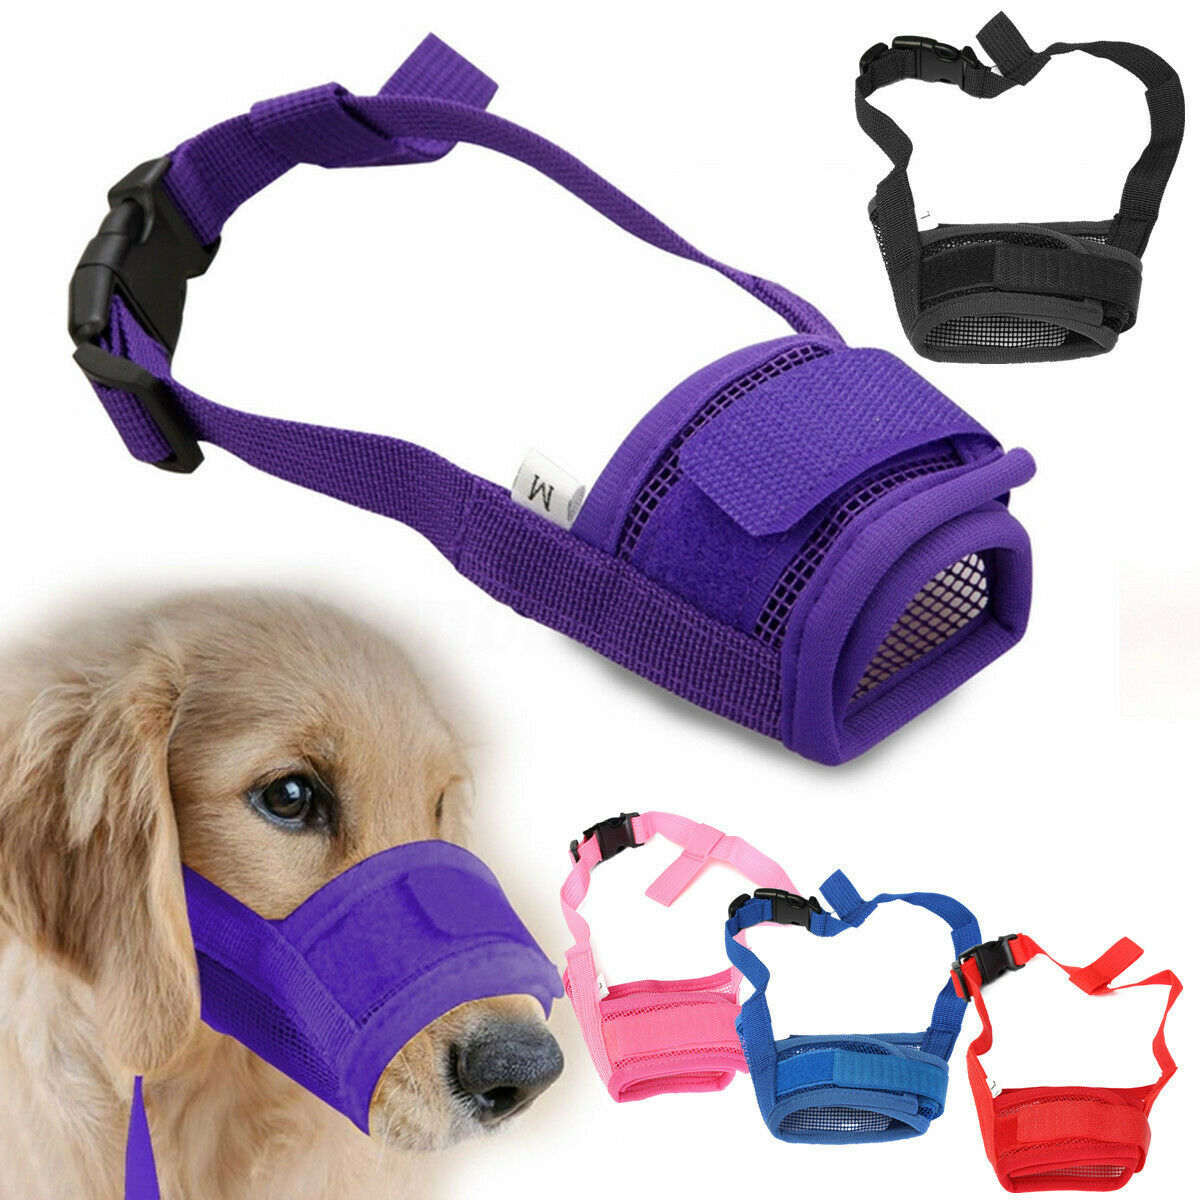 

Adjustable Dog Pets Mask Small & Large Train Mesh Mouth Muzzle Basket Grooming Anti Stop Bark Anti-bite Stop Chewing Puppy Safety